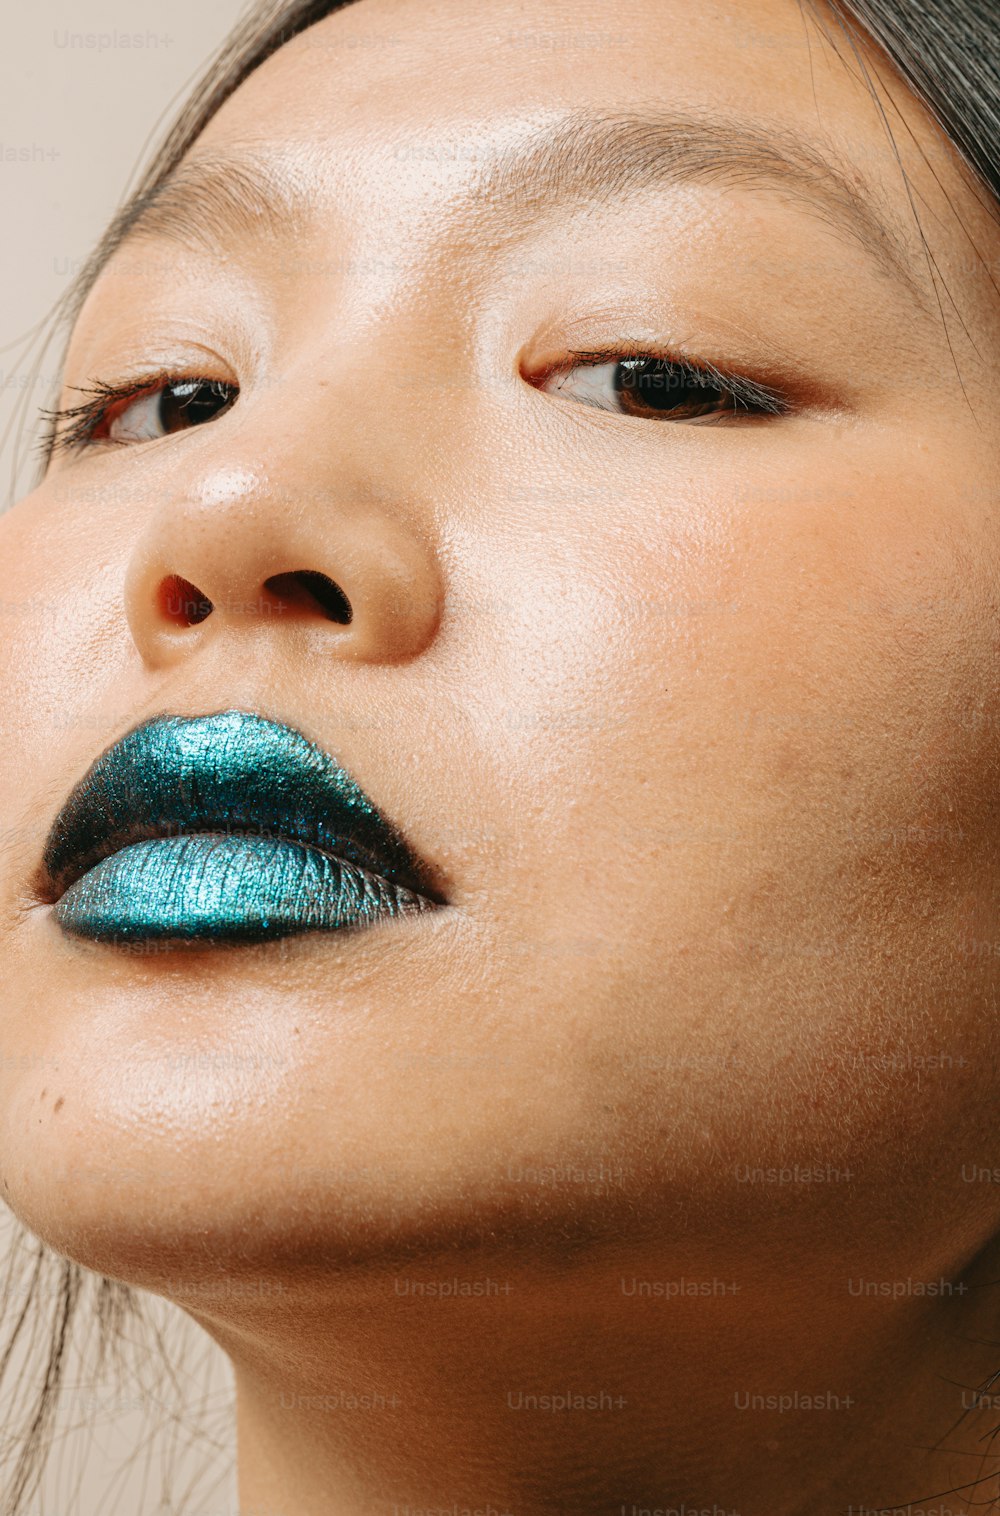 a close up of a person with a blue lipstick